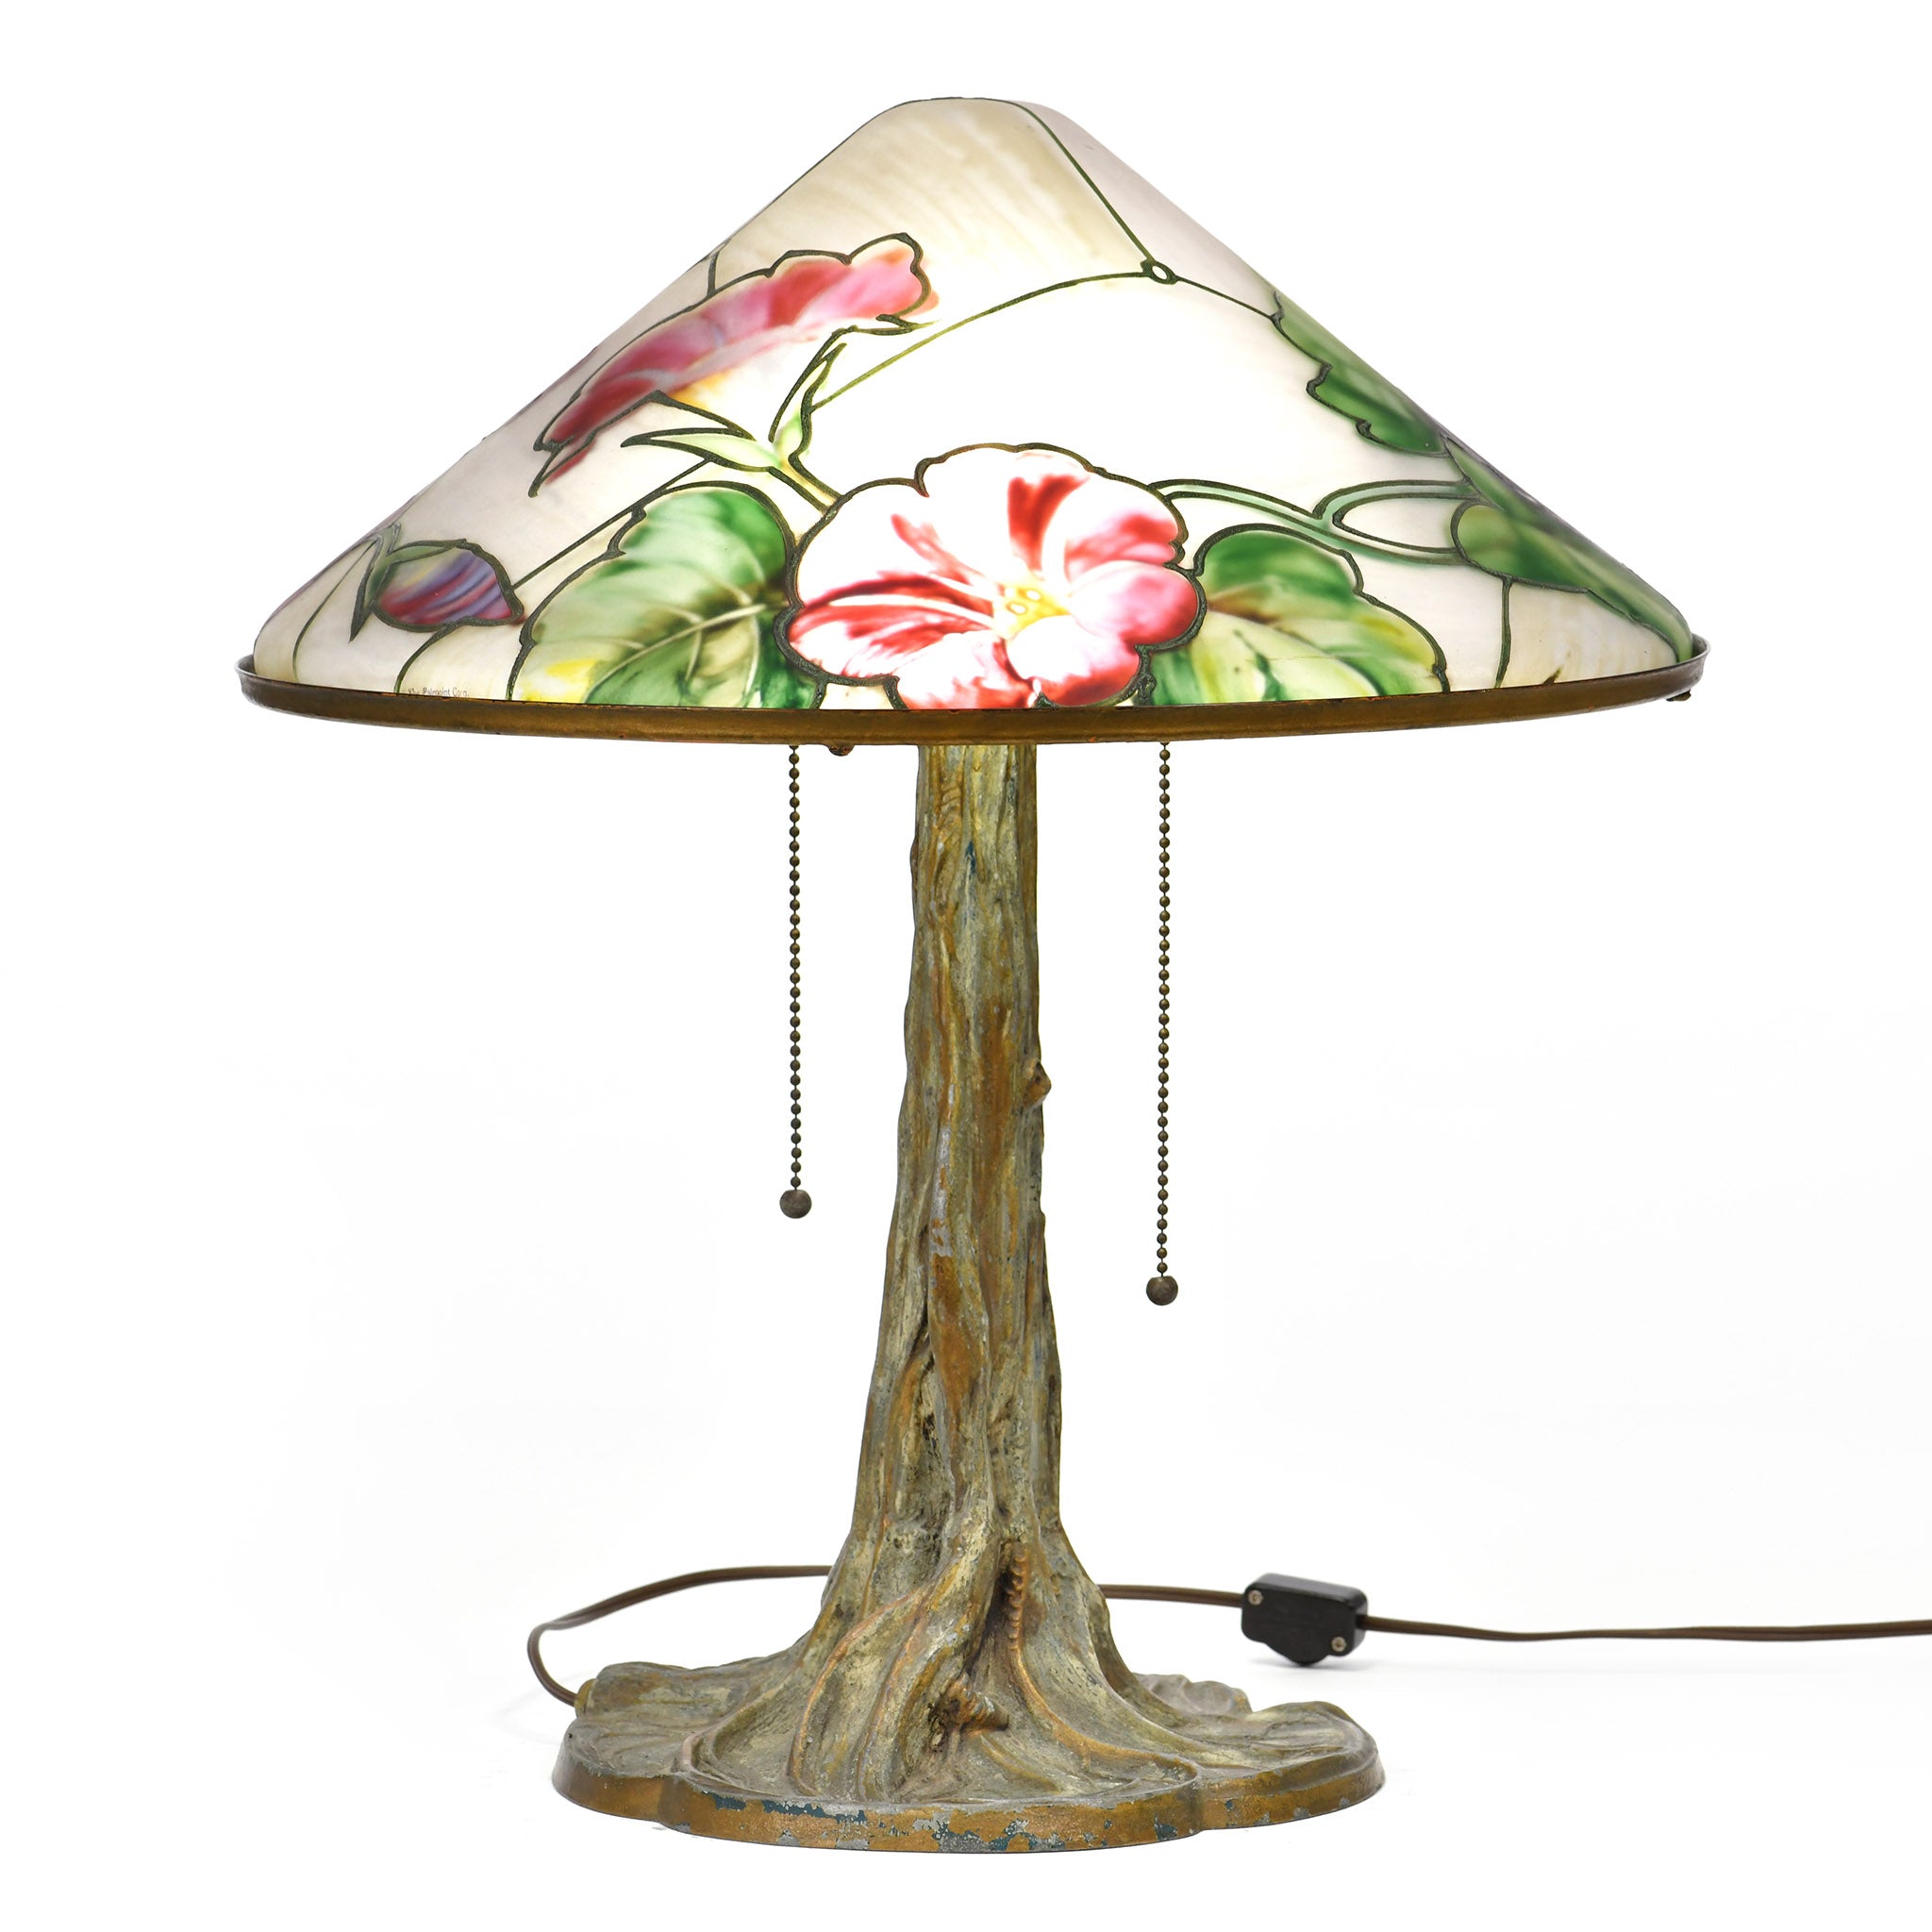 Elegant Pairpoint table lamp with intricate glass shade design.